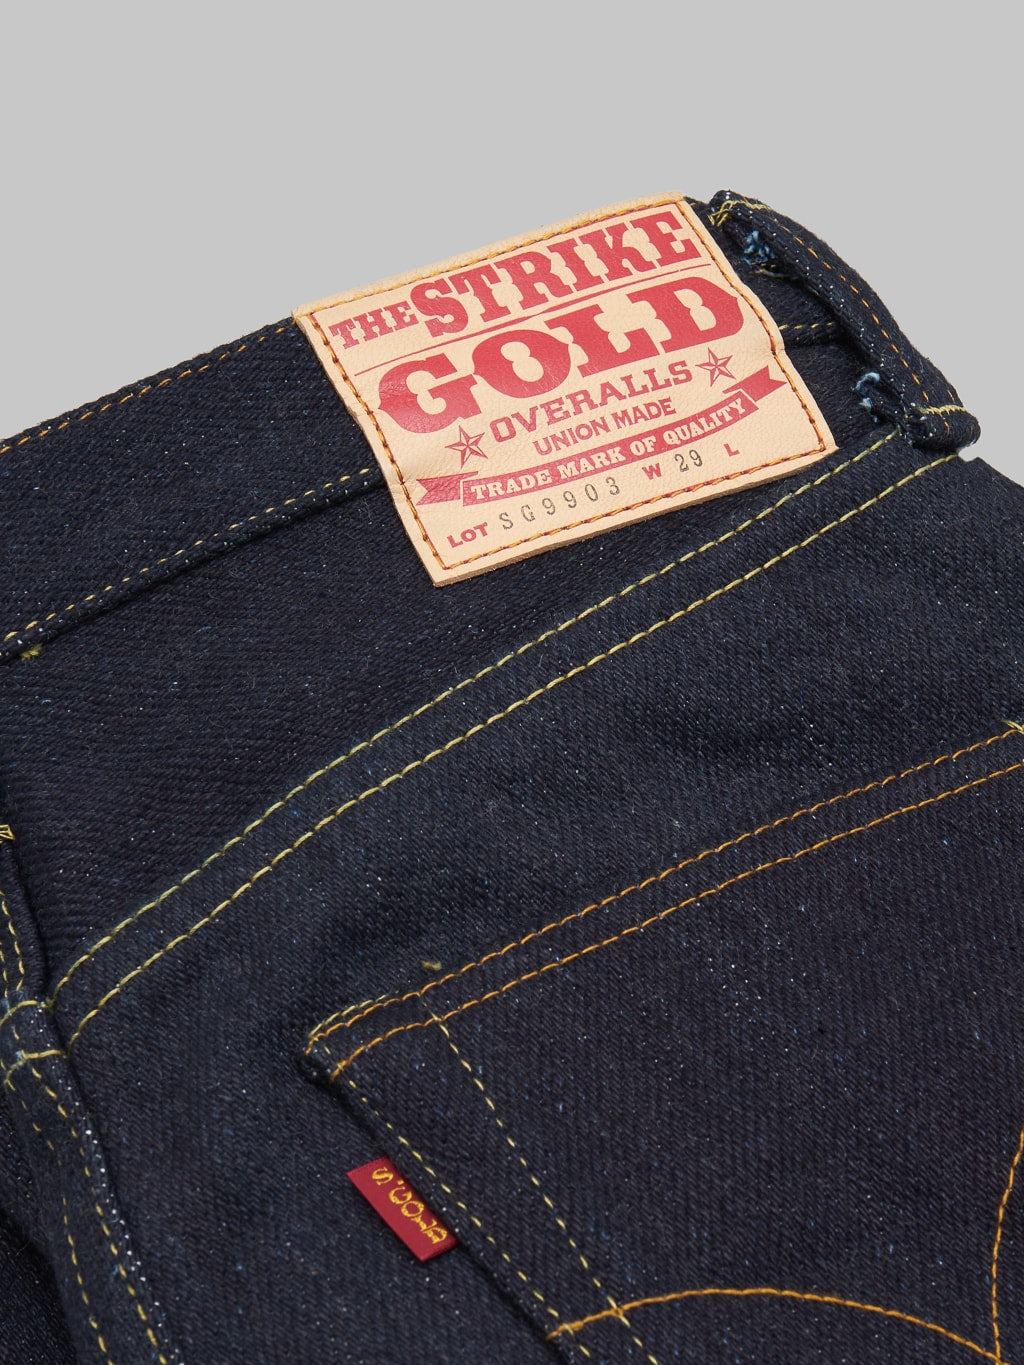 The Strike Gold Extra Heavyweight regular straight jeans brand red tab